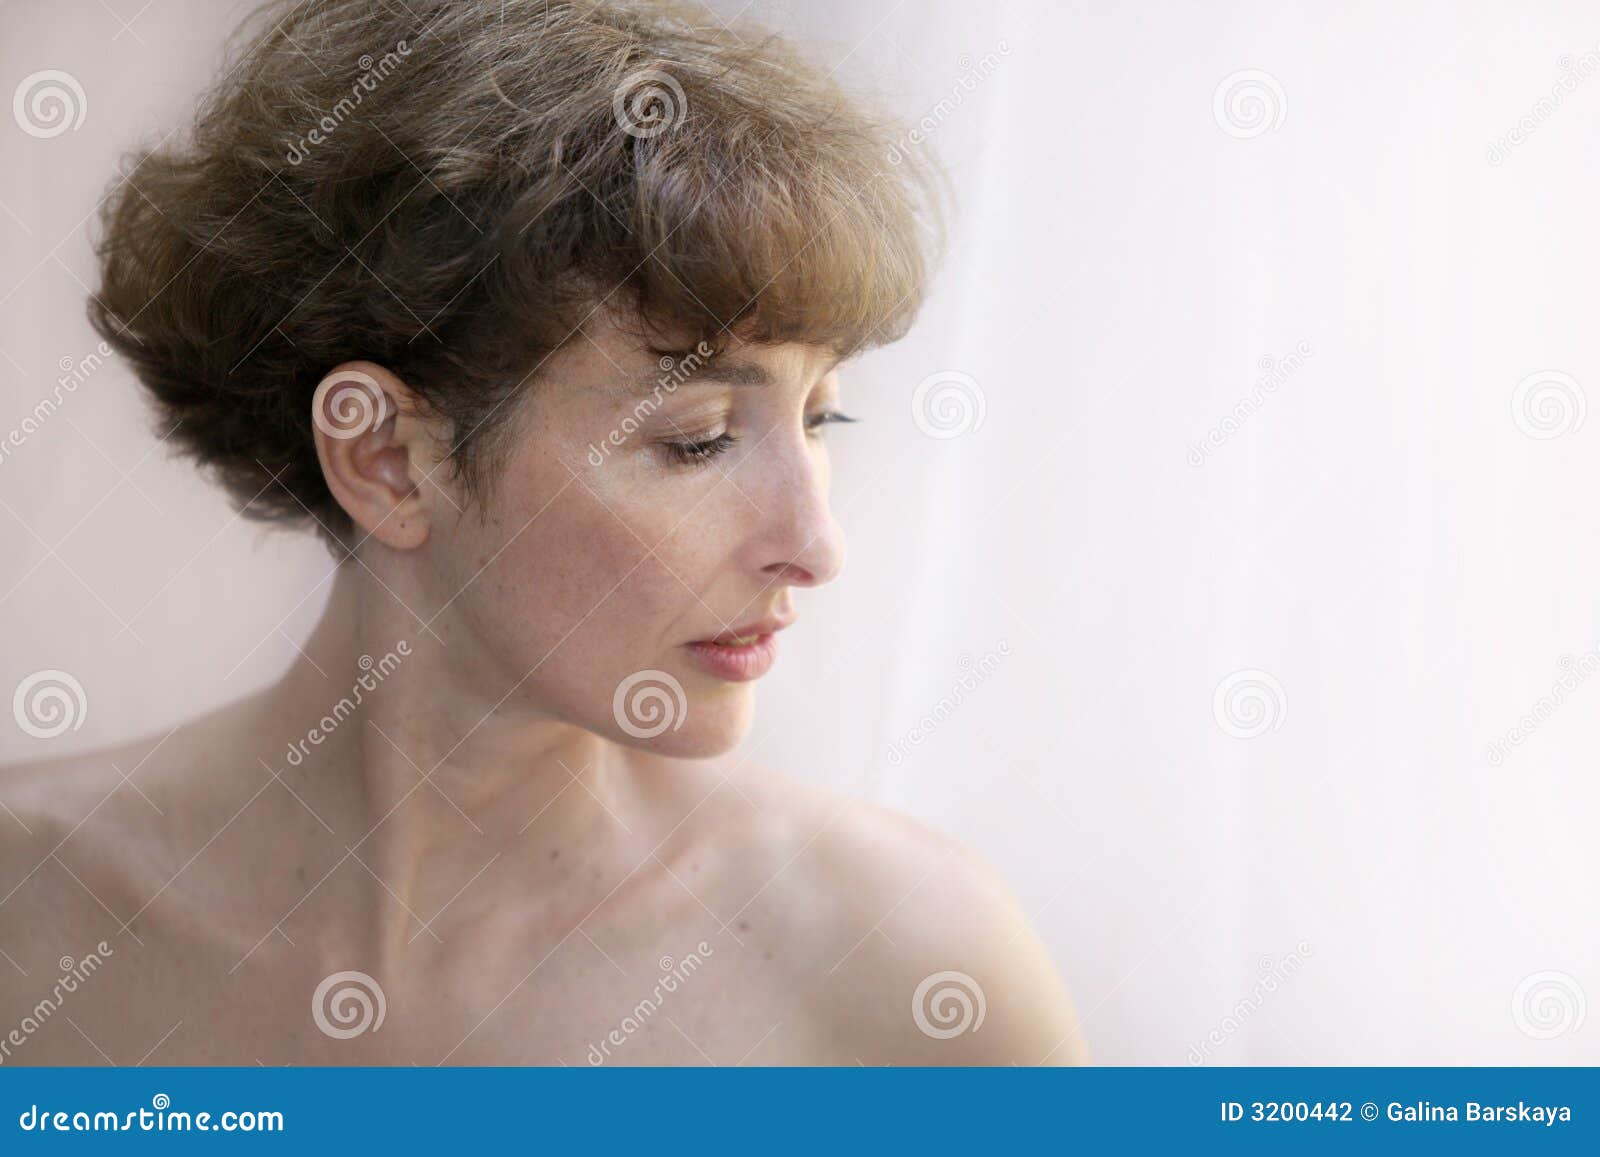 Topless Woman In Lingerie Royalty Free Stock Photography